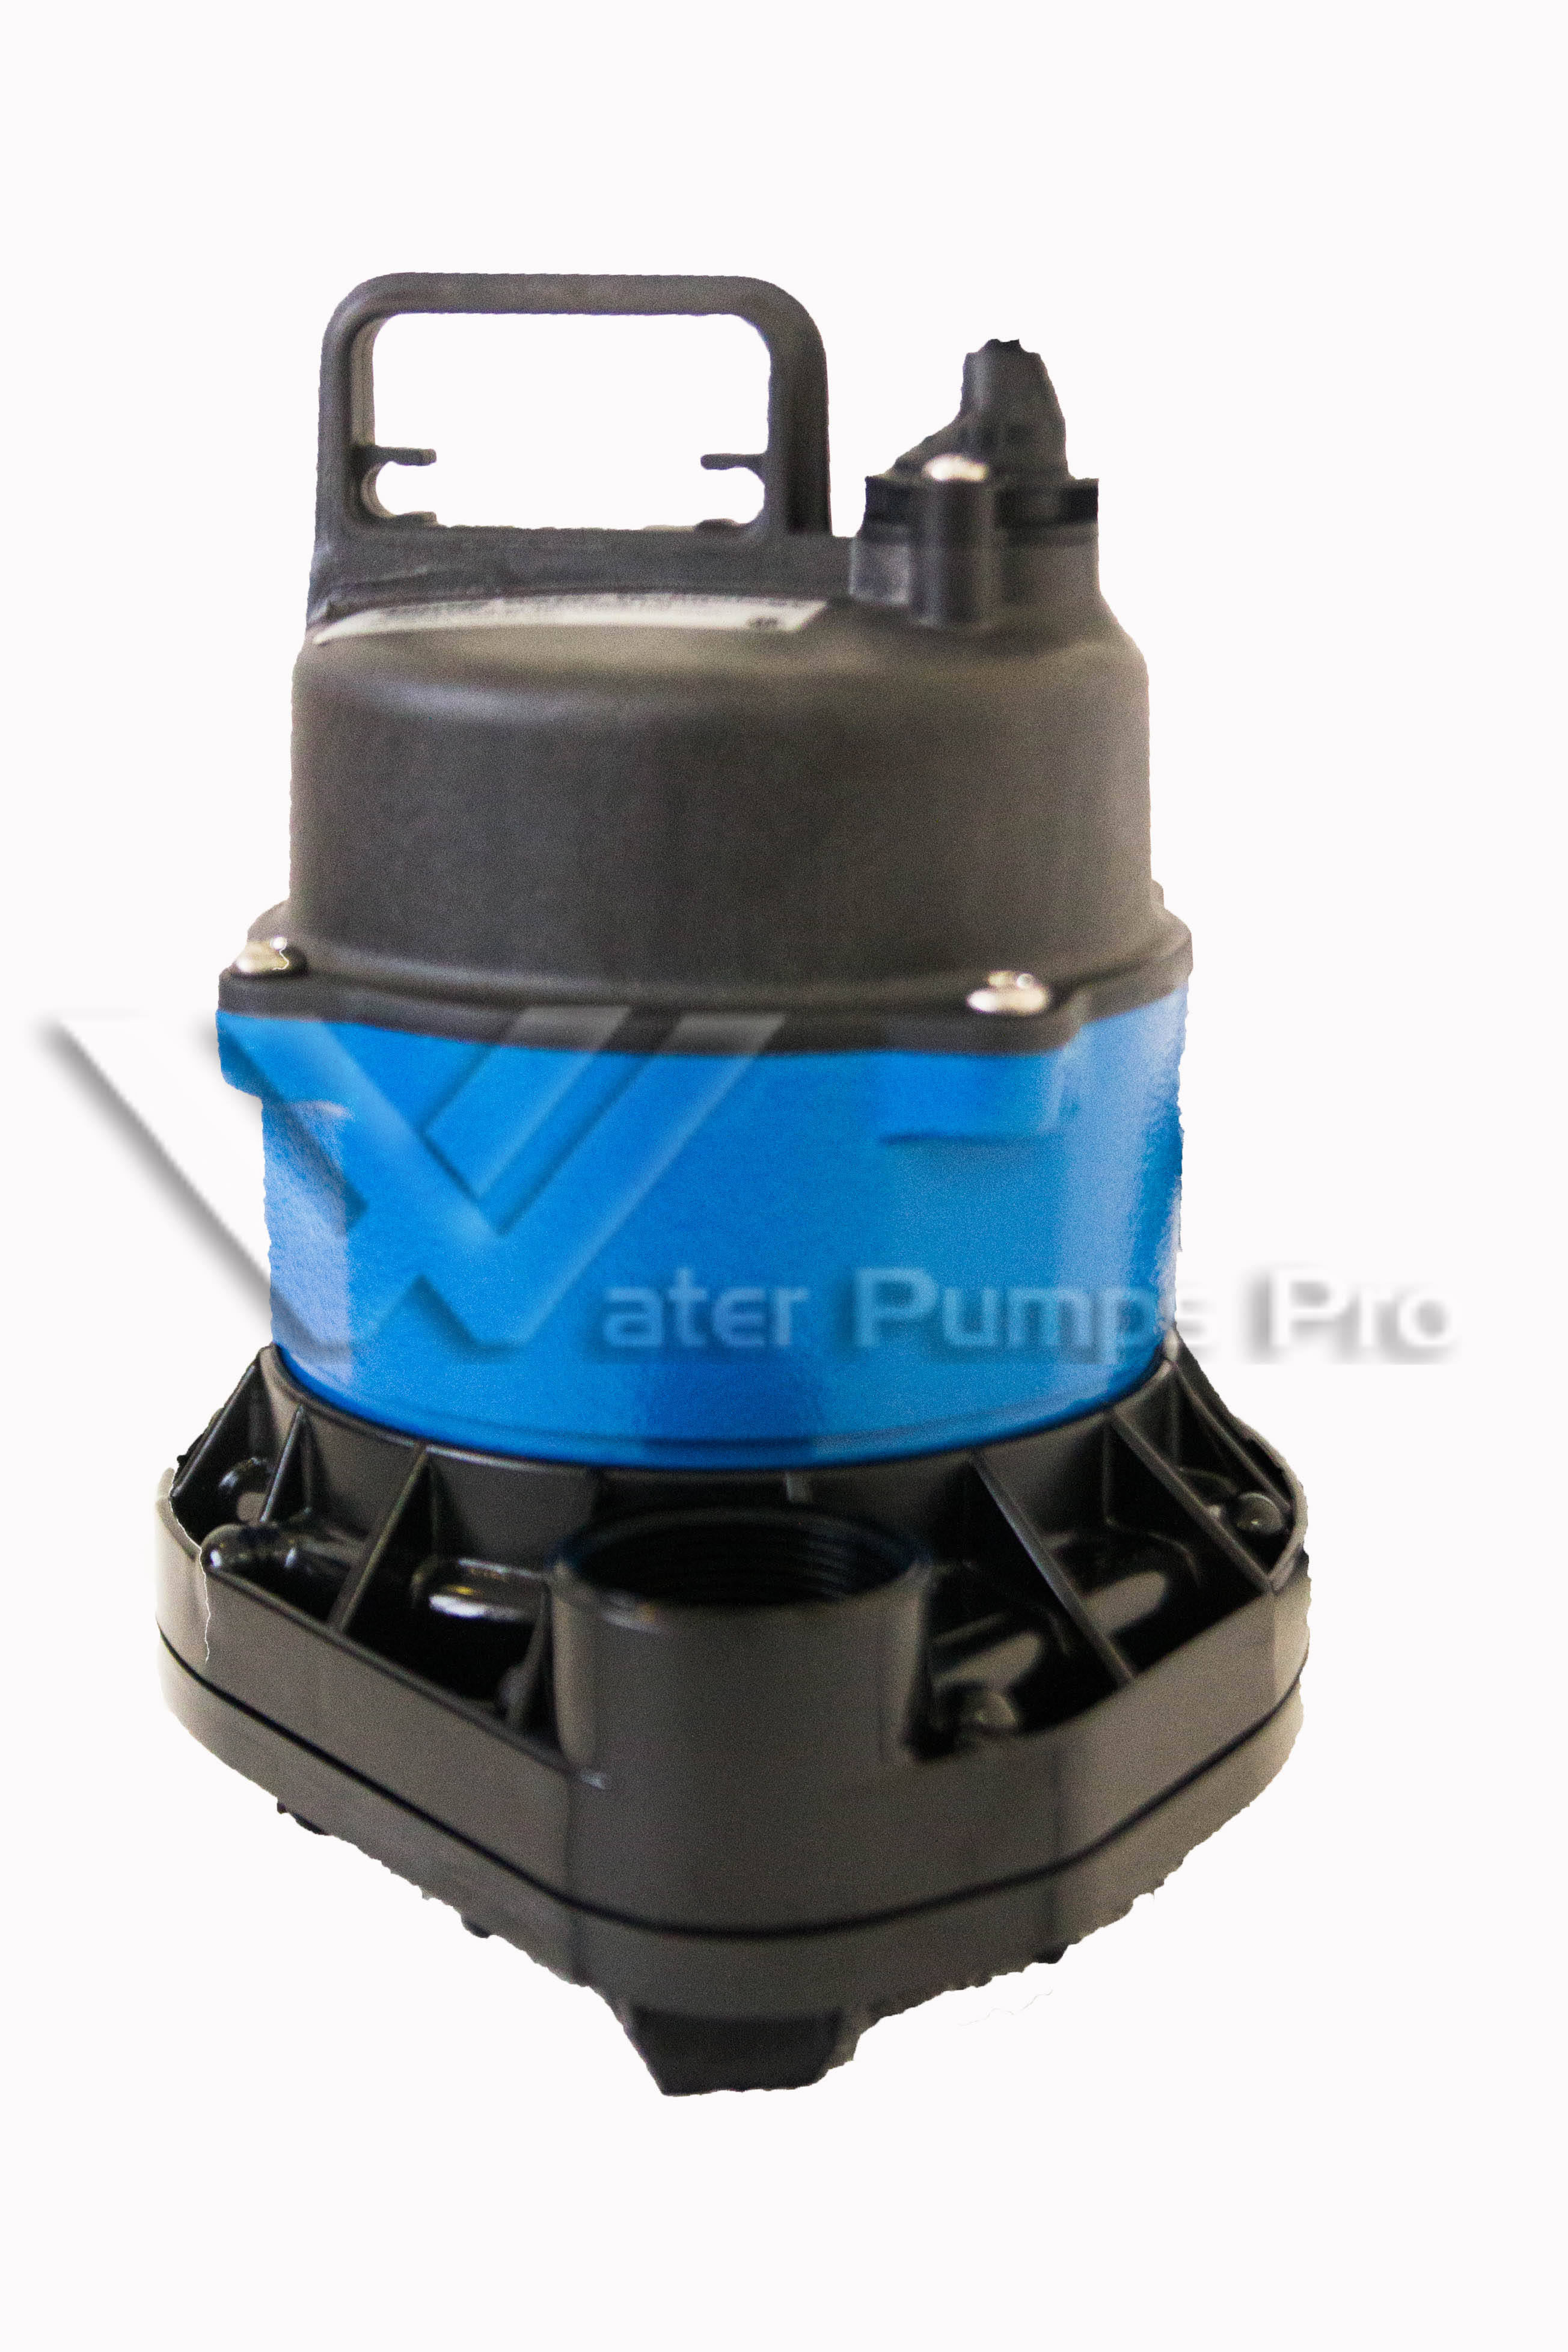 Goulds EP0512F 1/2HP 230V Submersible Effluent Pump - Click Image to Close